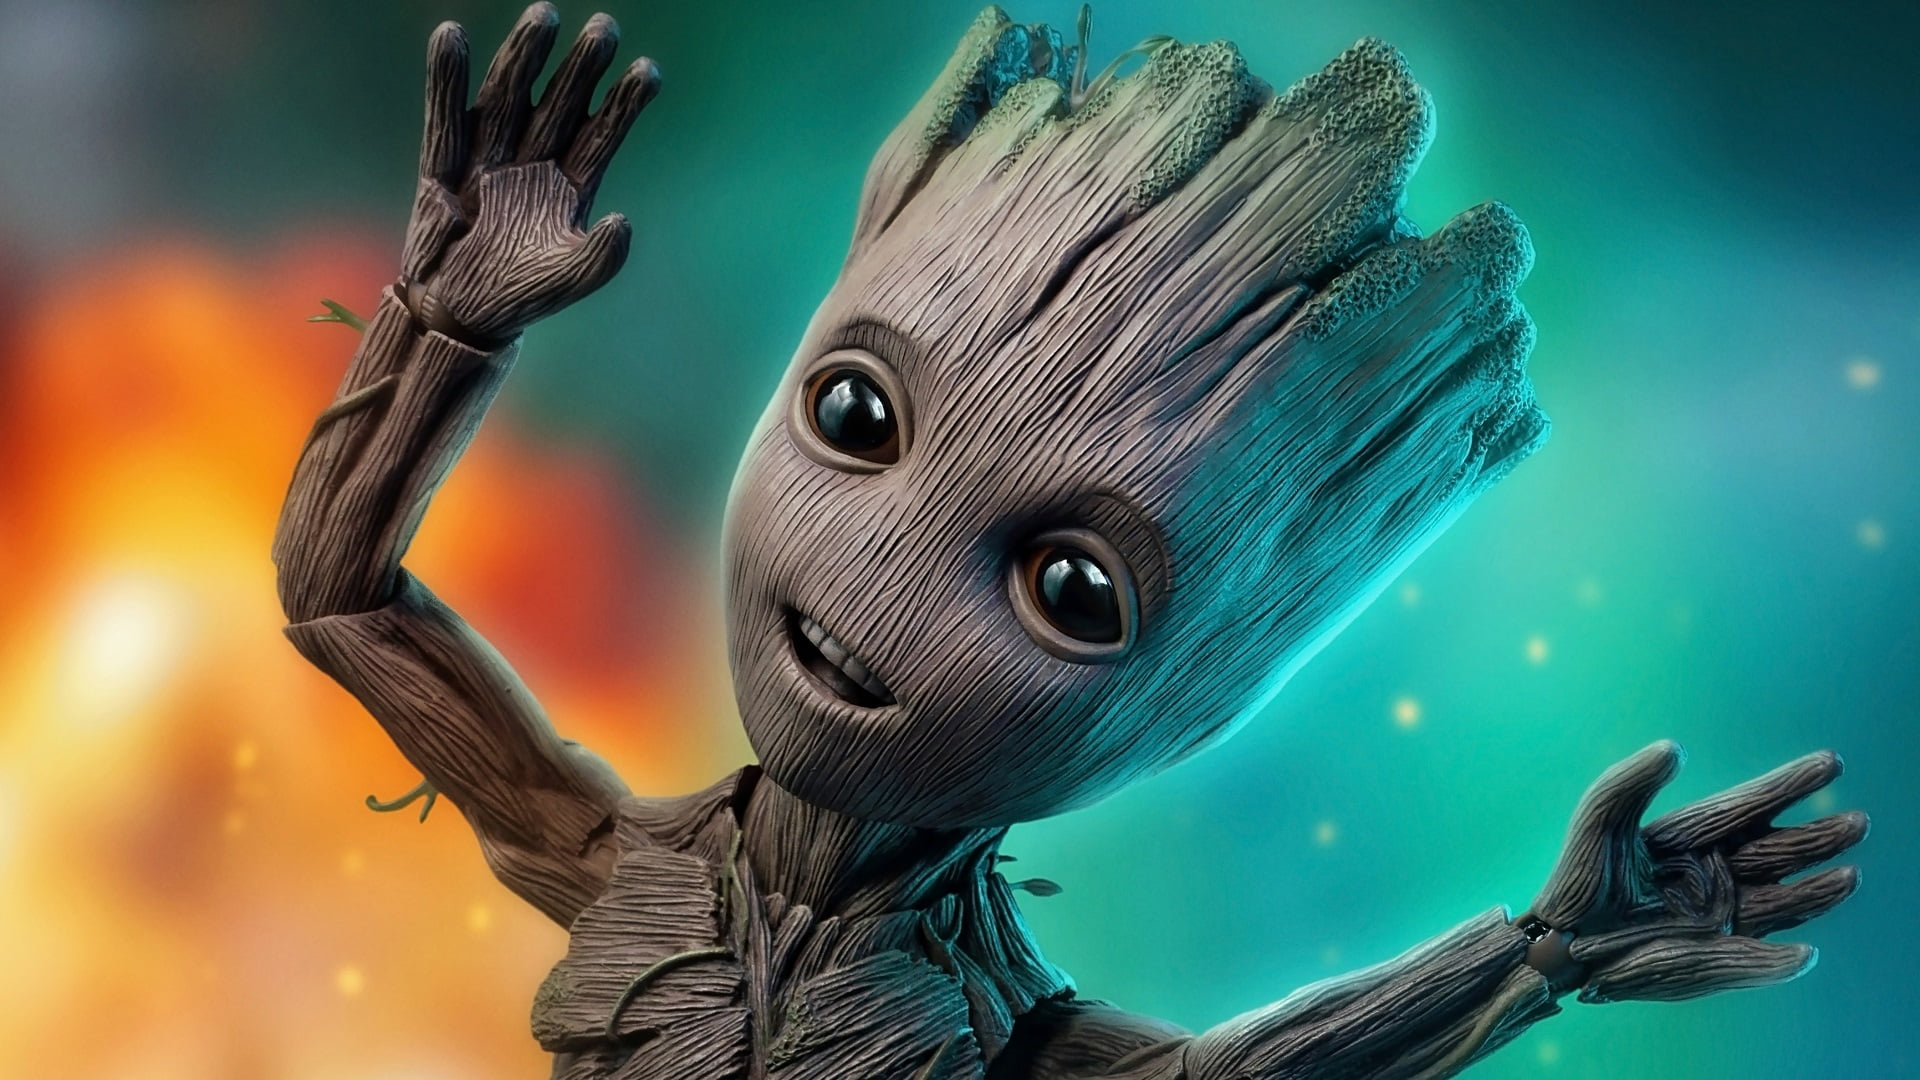 Guardians of the Galaxy Vol. 2, Groot